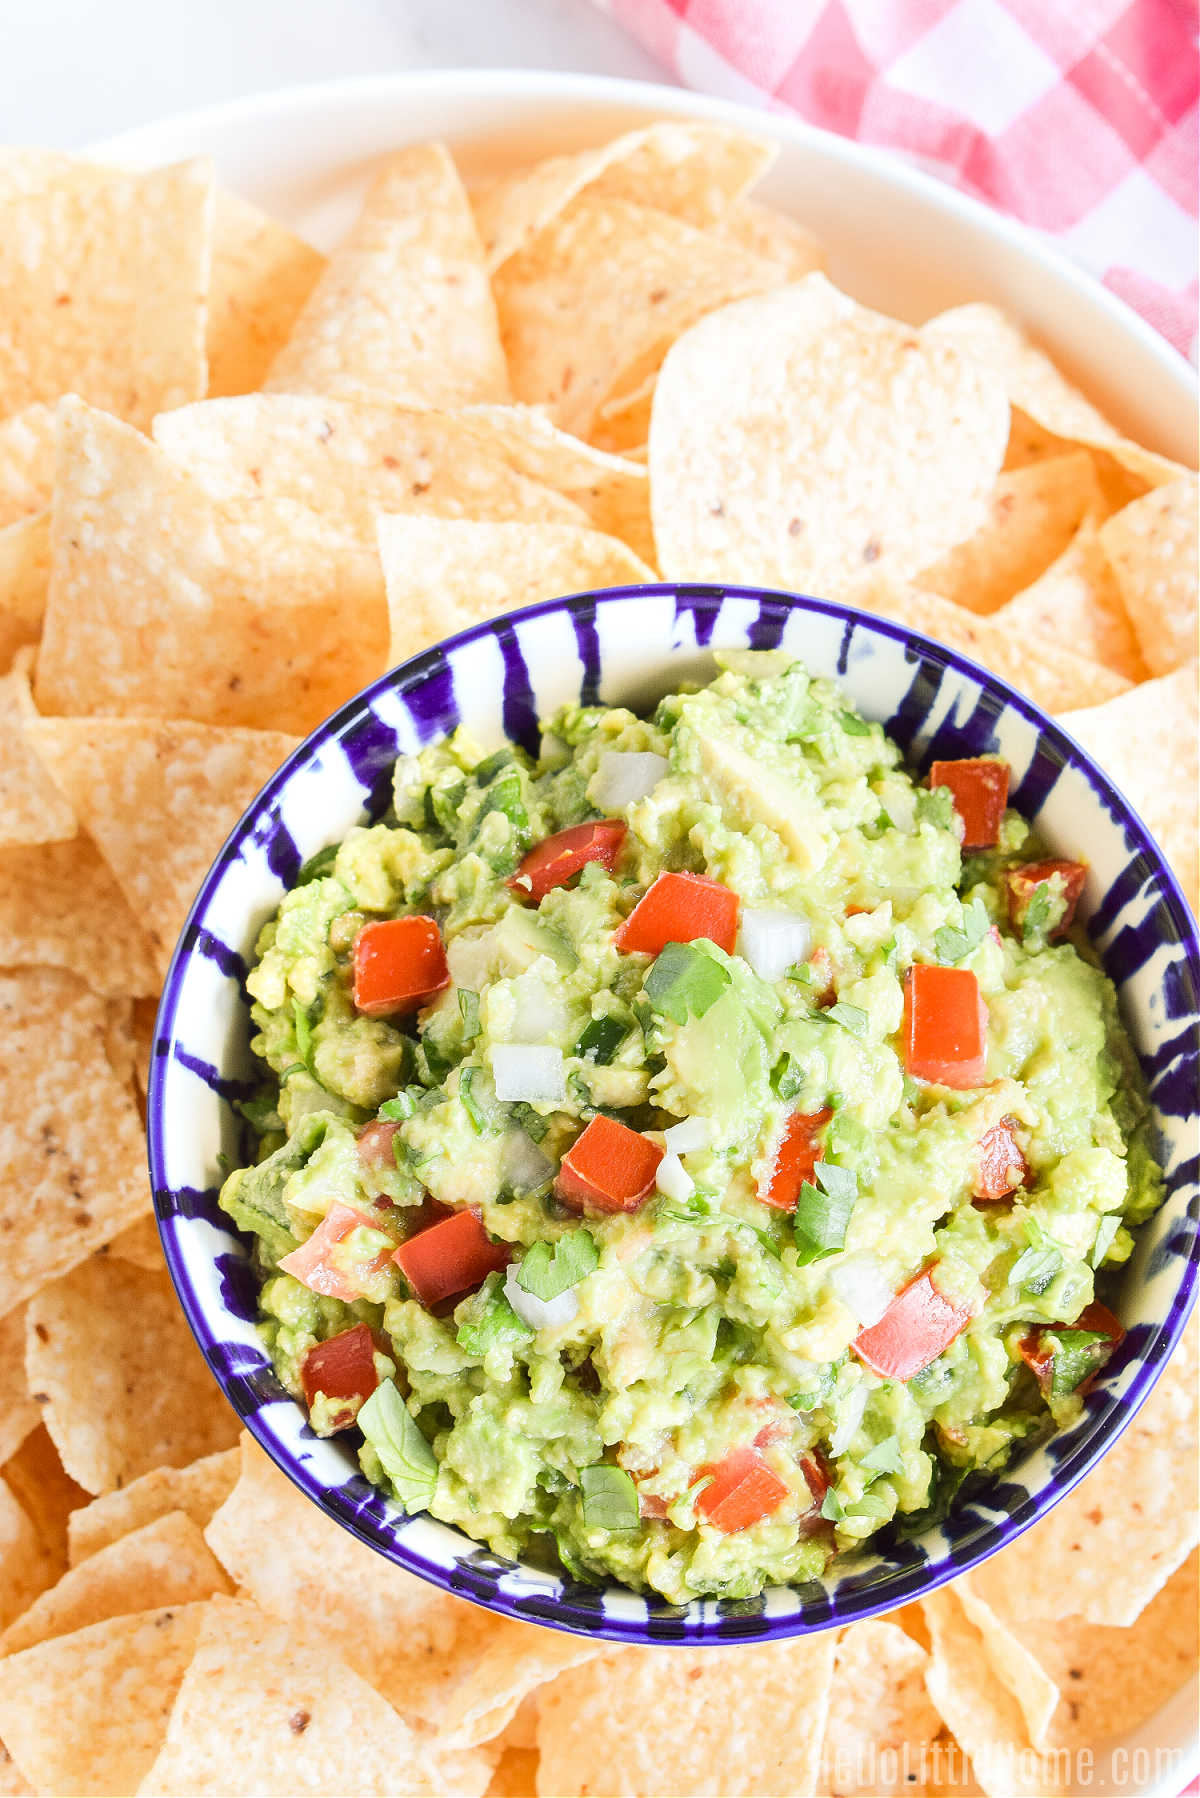 A bowl of the finished dip surrounded by tortilla chips.